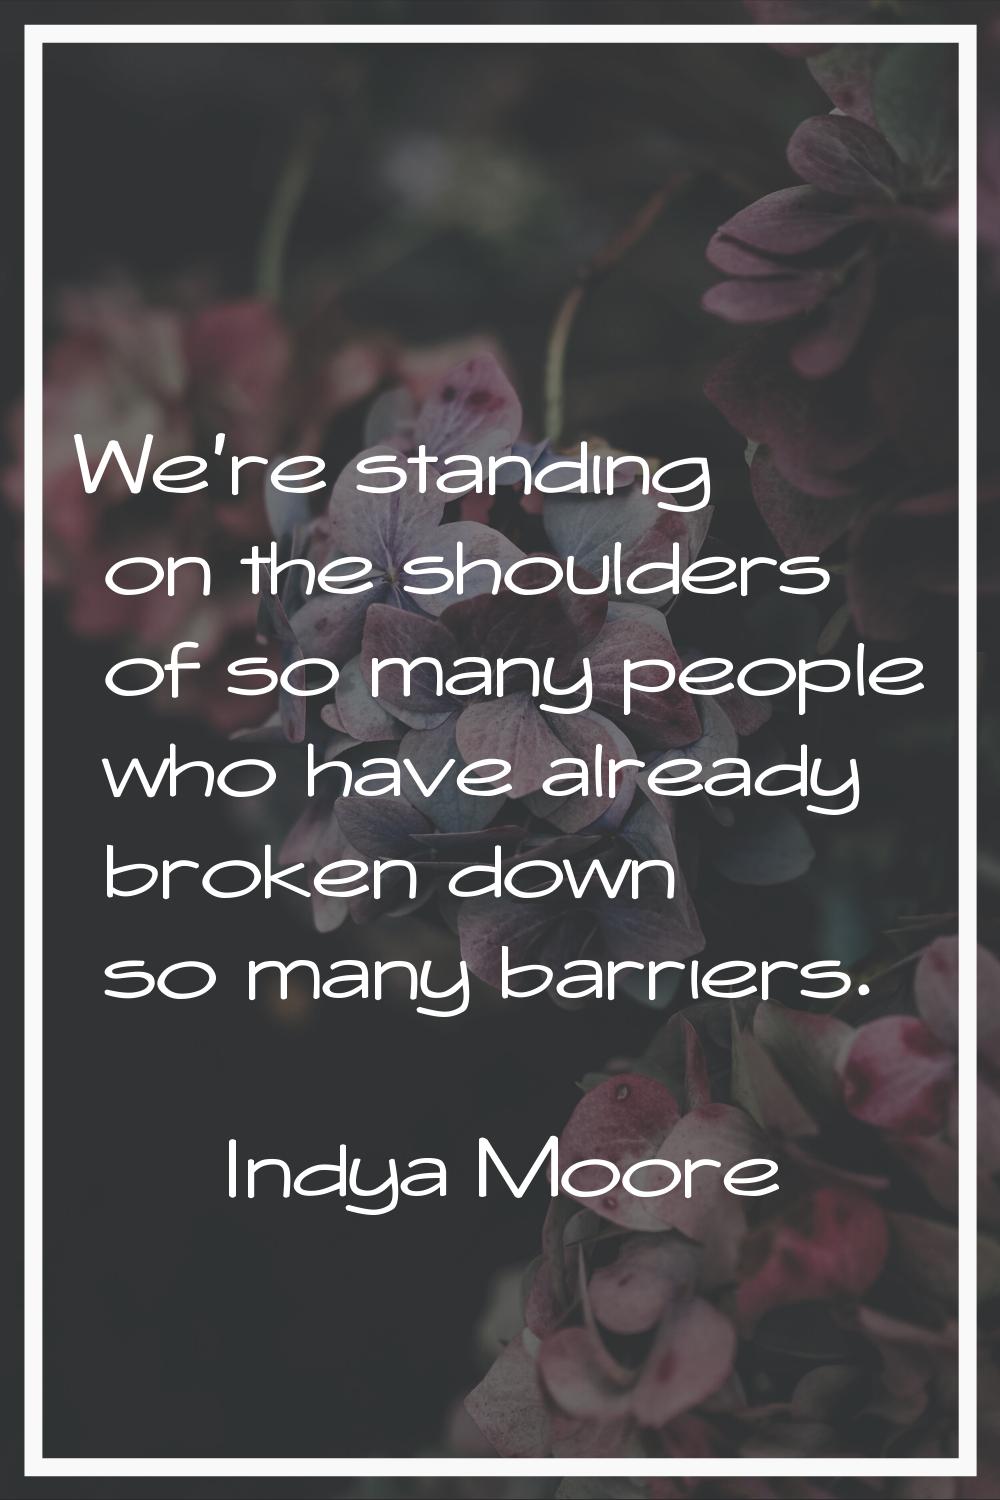 We're standing on the shoulders of so many people who have already broken down so many barriers.